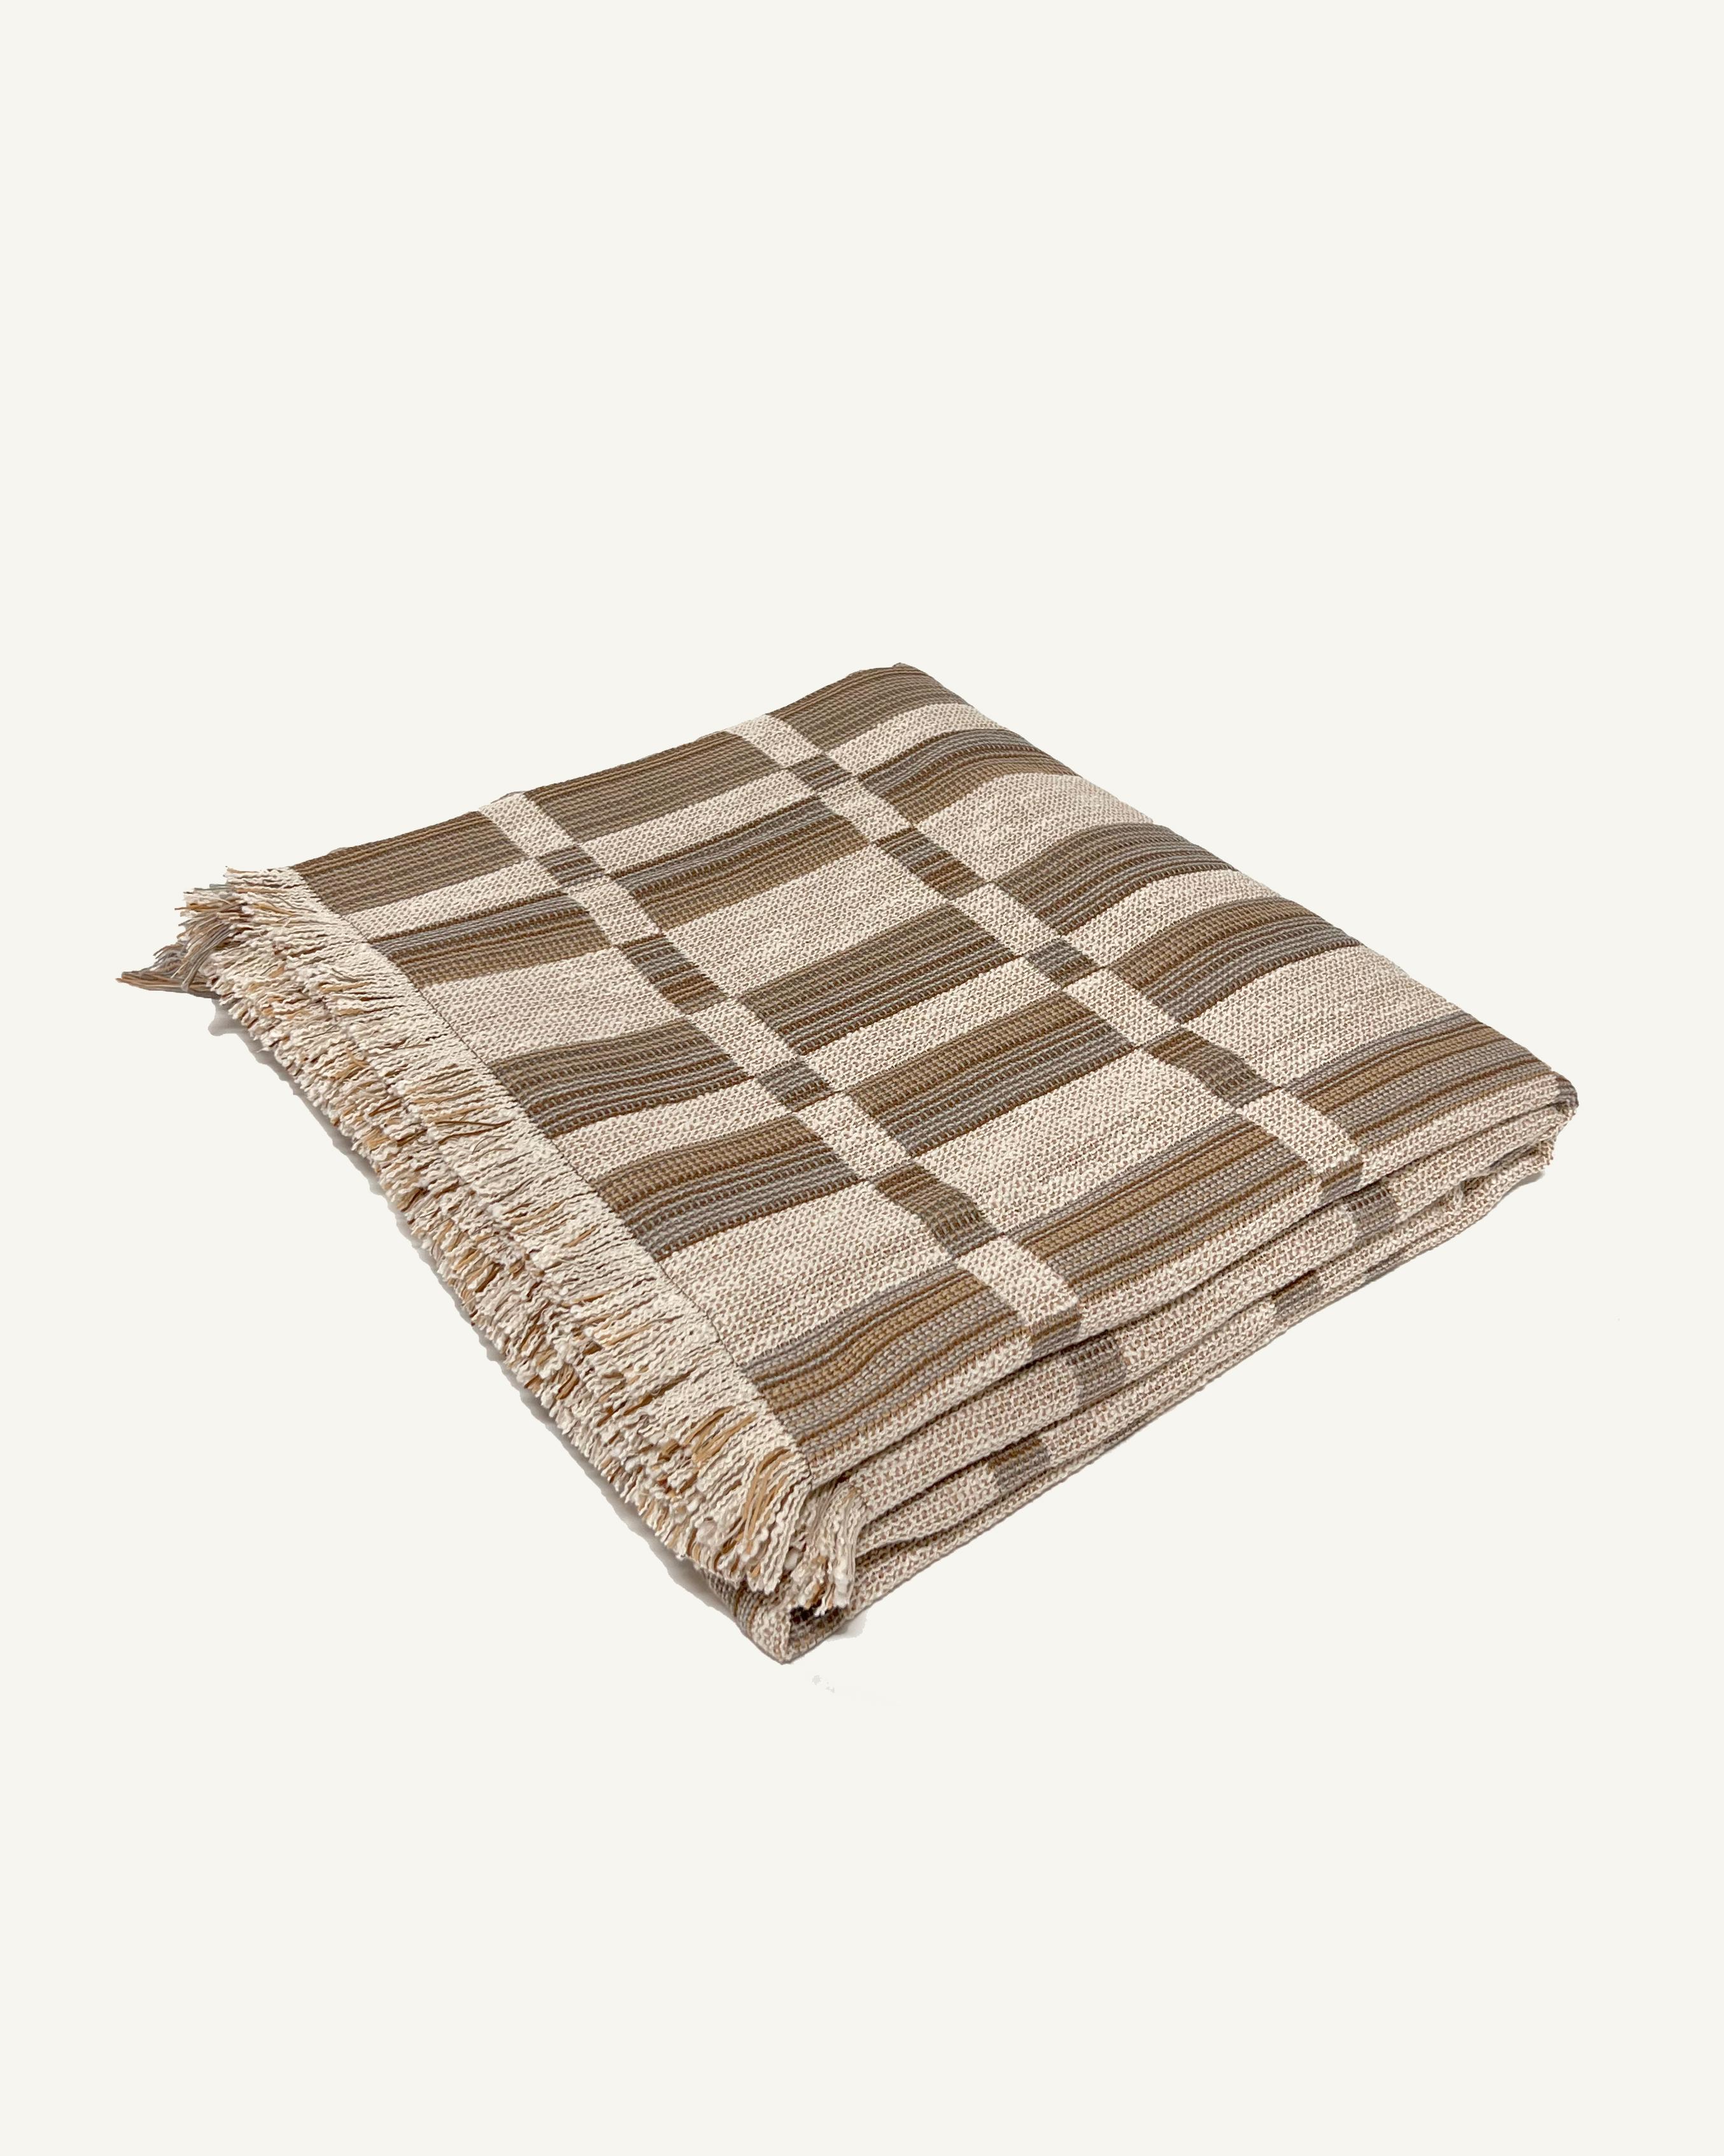 The 'Joaquin' throw is designed by Folk Textiles—a LA based brand dedicated to thoughtful living. This textile is woven in the UK using sustainably-dyed organic cotton from Italy. 

'Joaquin' captures the easygoing spirit of Mexican masculinity.